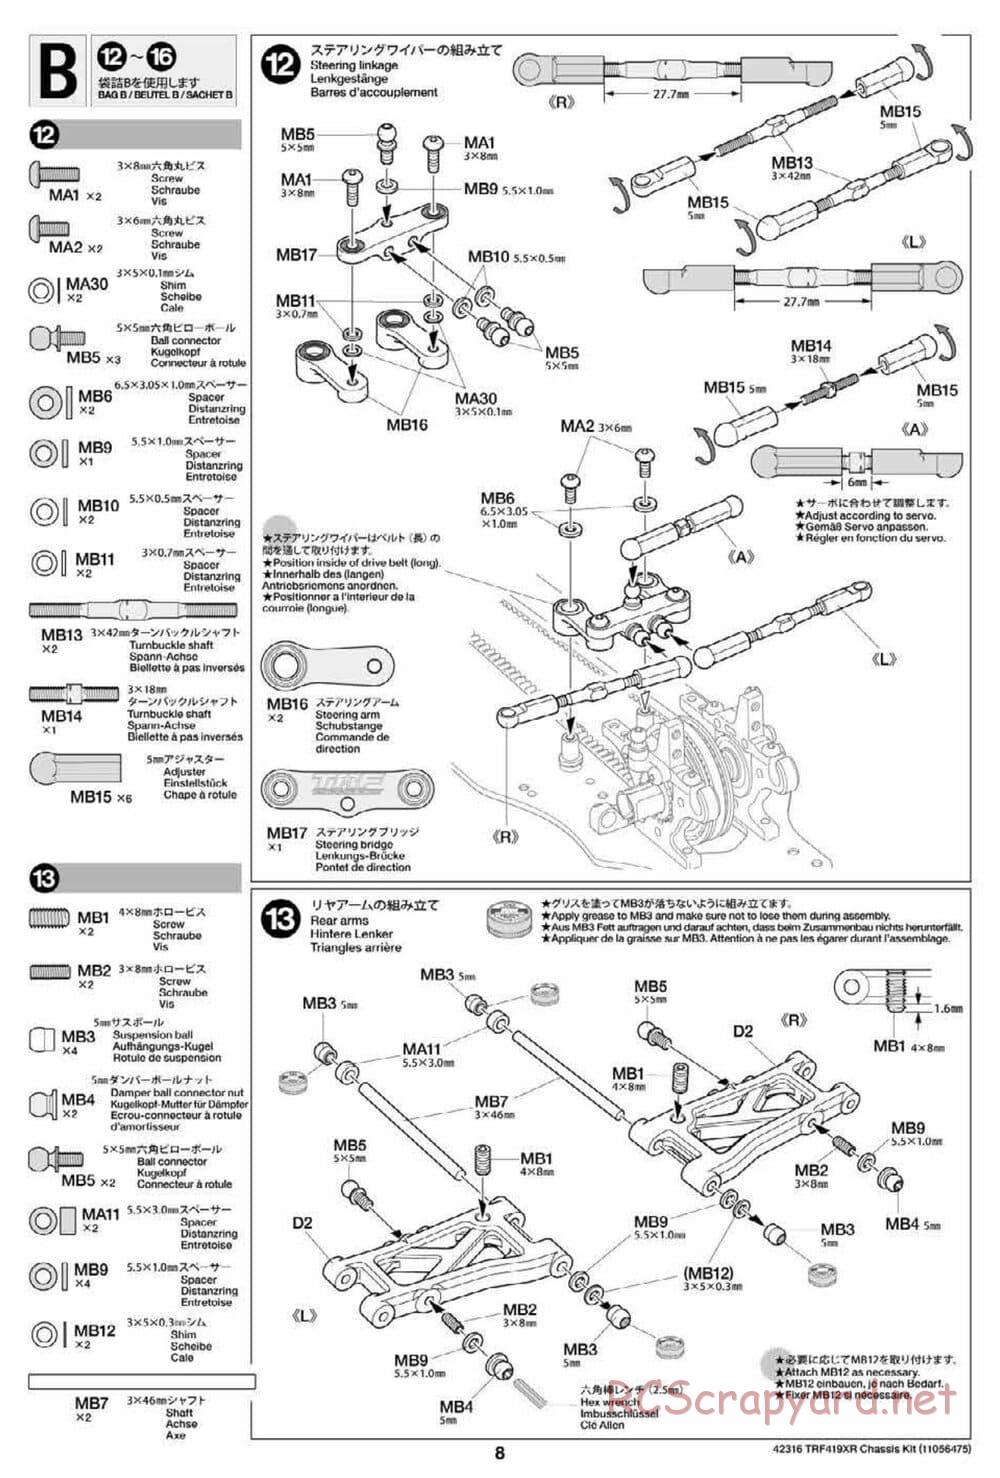 Tamiya - TRF419XR Chassis - Manual - Page 8